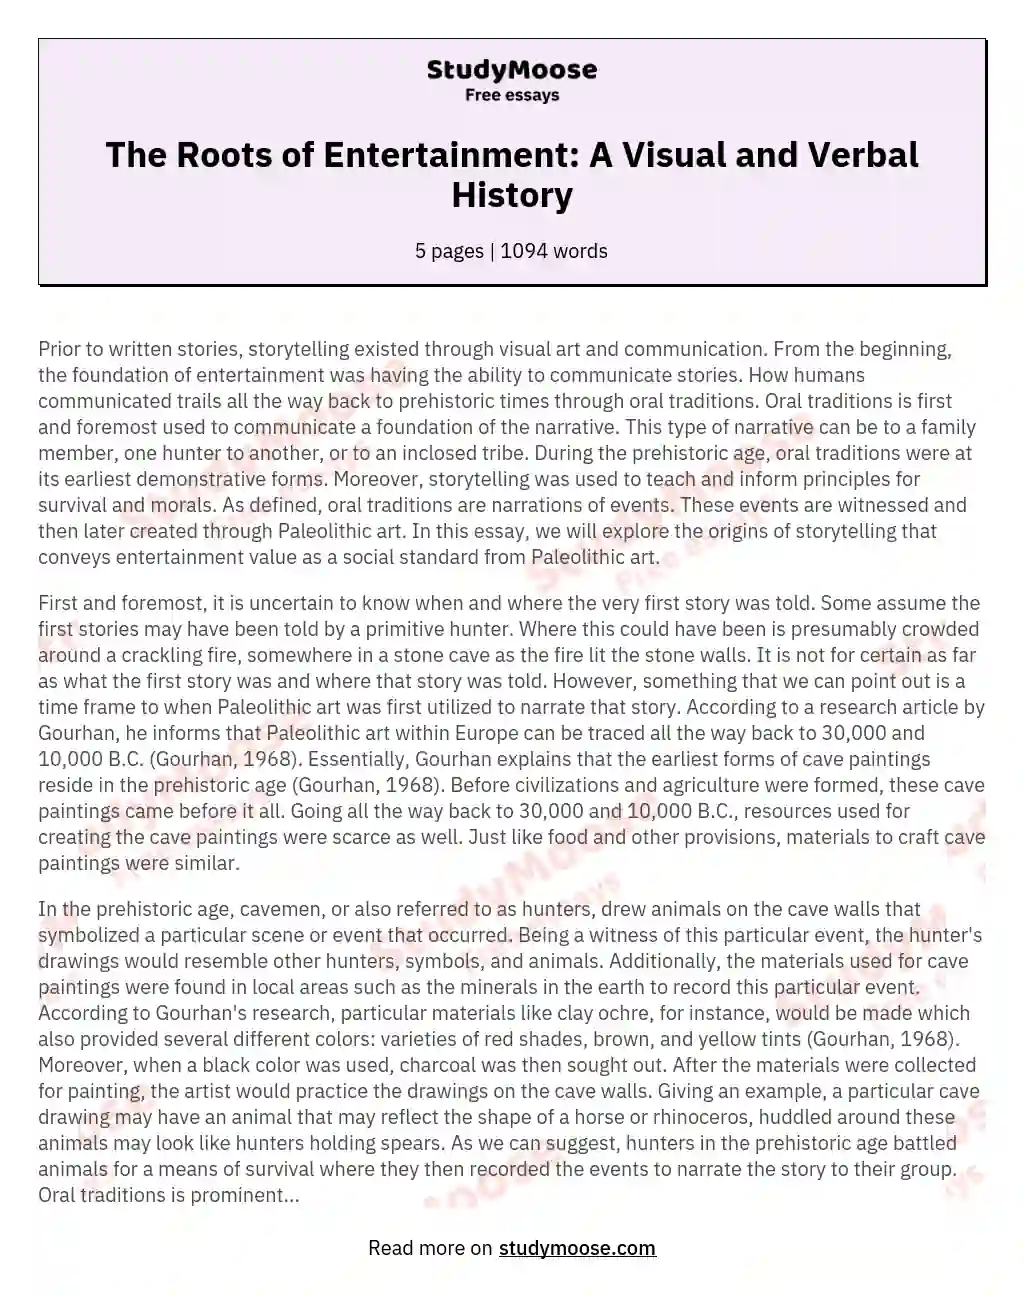 The Roots of Entertainment: A Visual and Verbal History essay